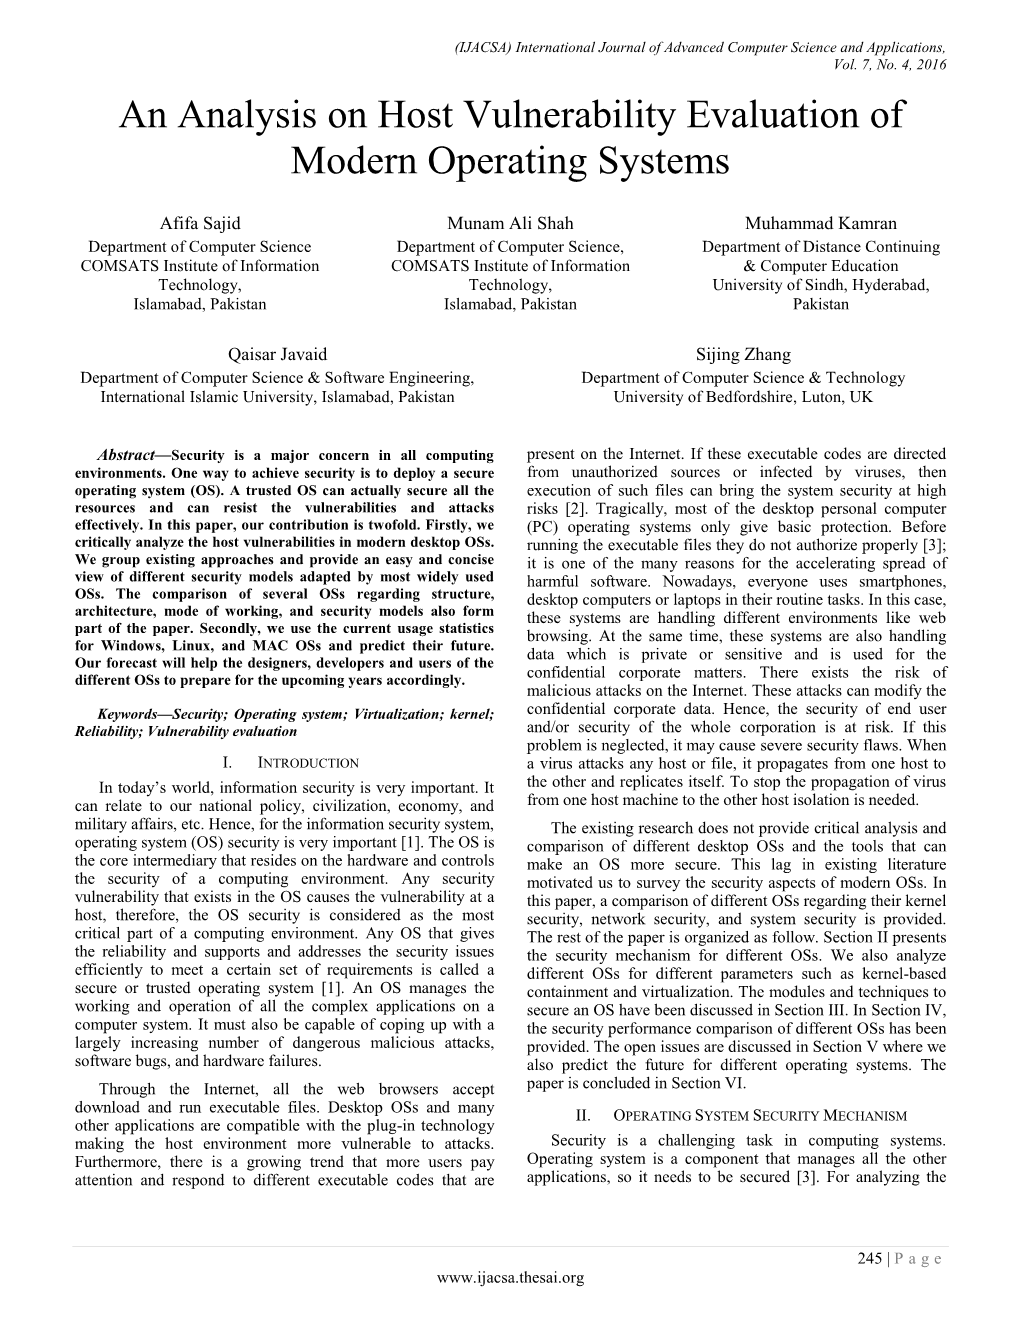 An Analysis on Host Vulnerability Evaluation of Modern Operating Systems